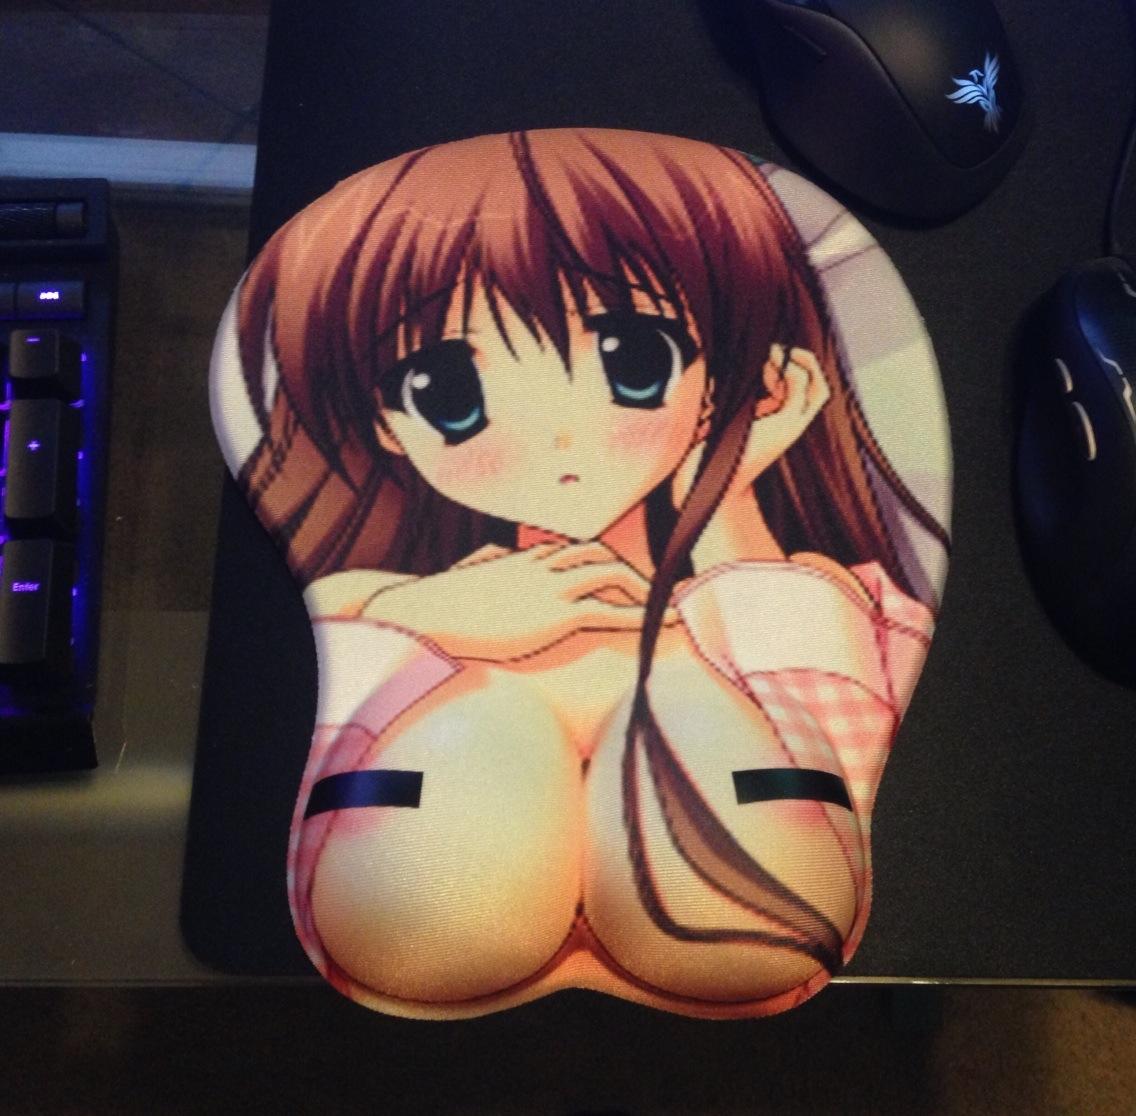 Thanks to @kungfufruitcup I upgraded my mouse pad today. 